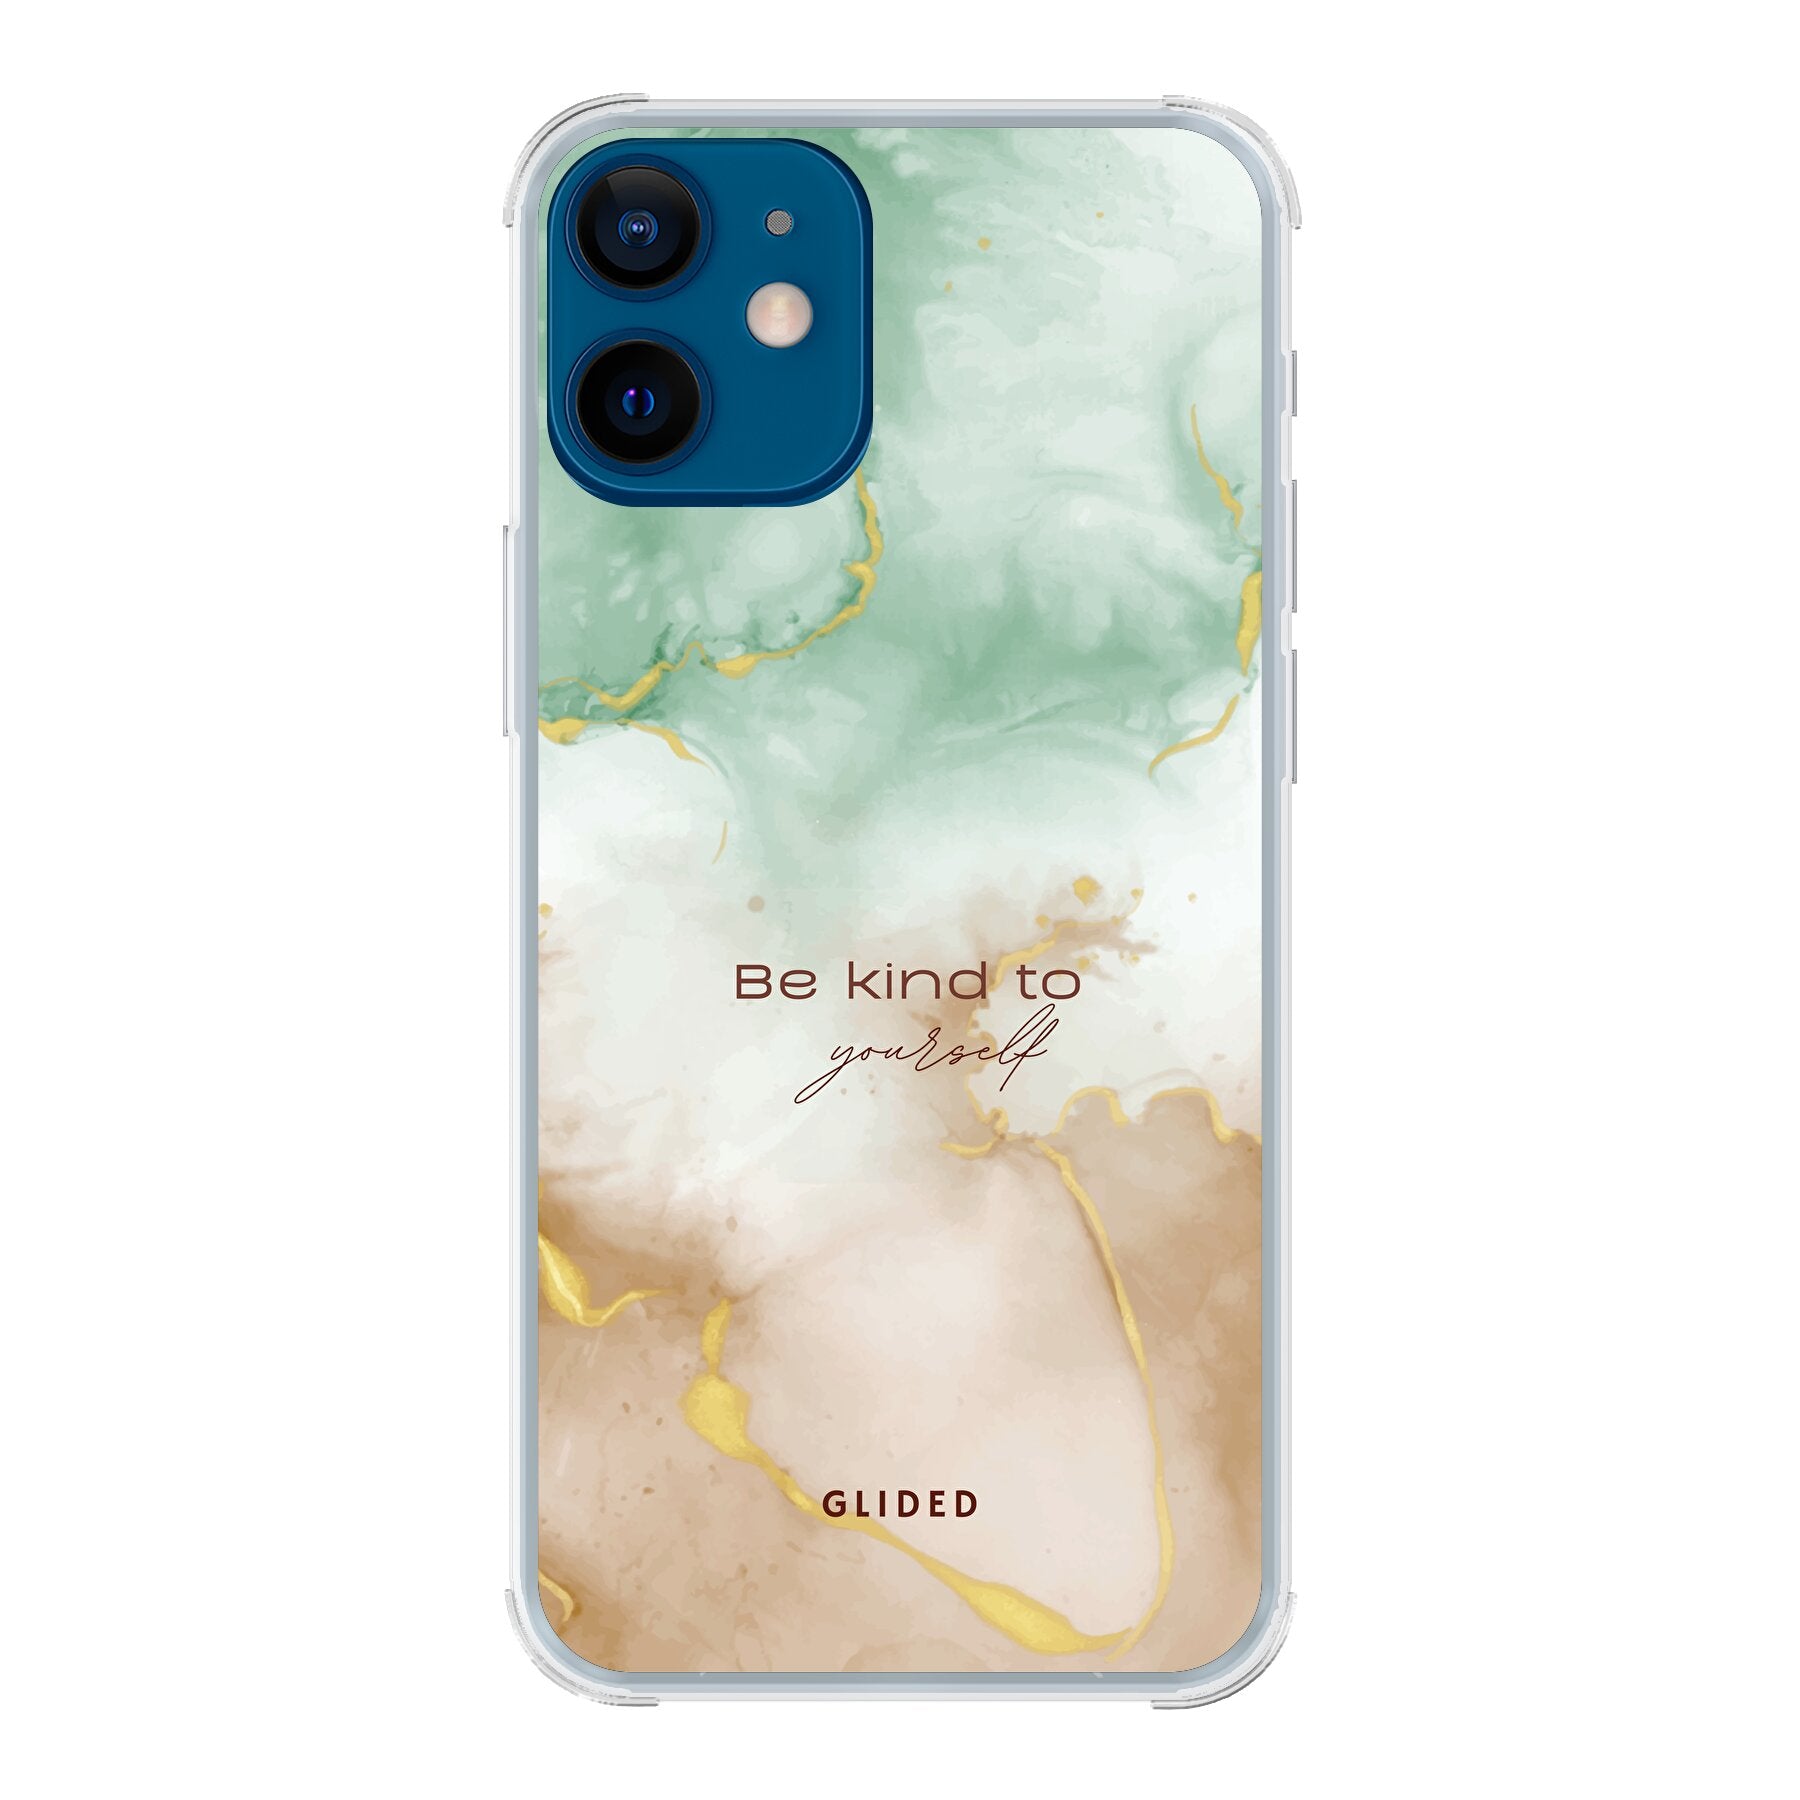 Kind to yourself - iPhone 12 mini Handyhülle Bumper case